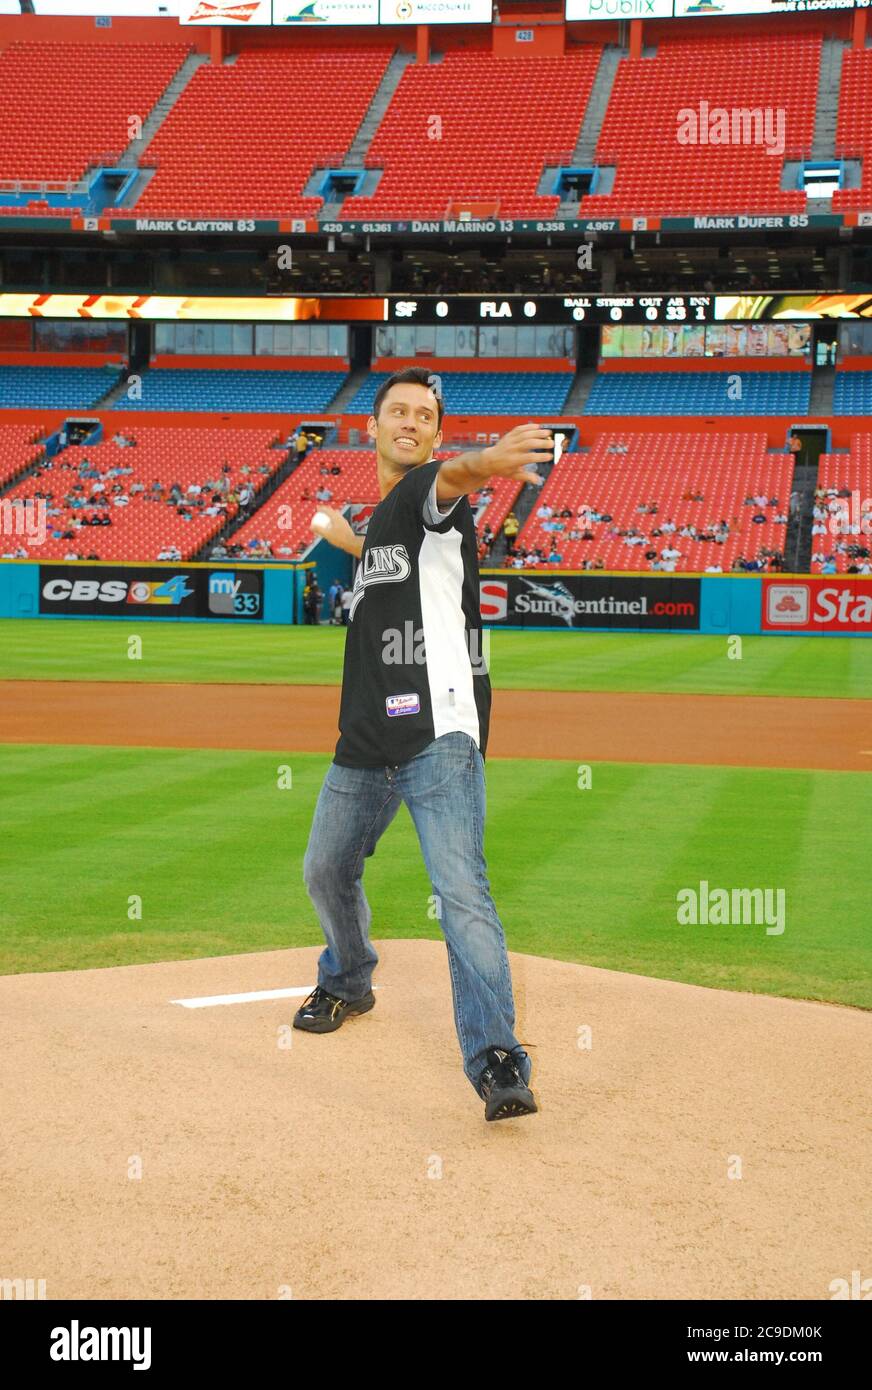 MIAMI, FL - June 6: Actor Jeffrey Donovan star of 'Burn Notice' throws out the first pitch before at a Florida Marlins home game at Dolphin Stadium on June 6, 2009 in Miami, Florida.  People;  Jeffrey Donovan Stock Photo